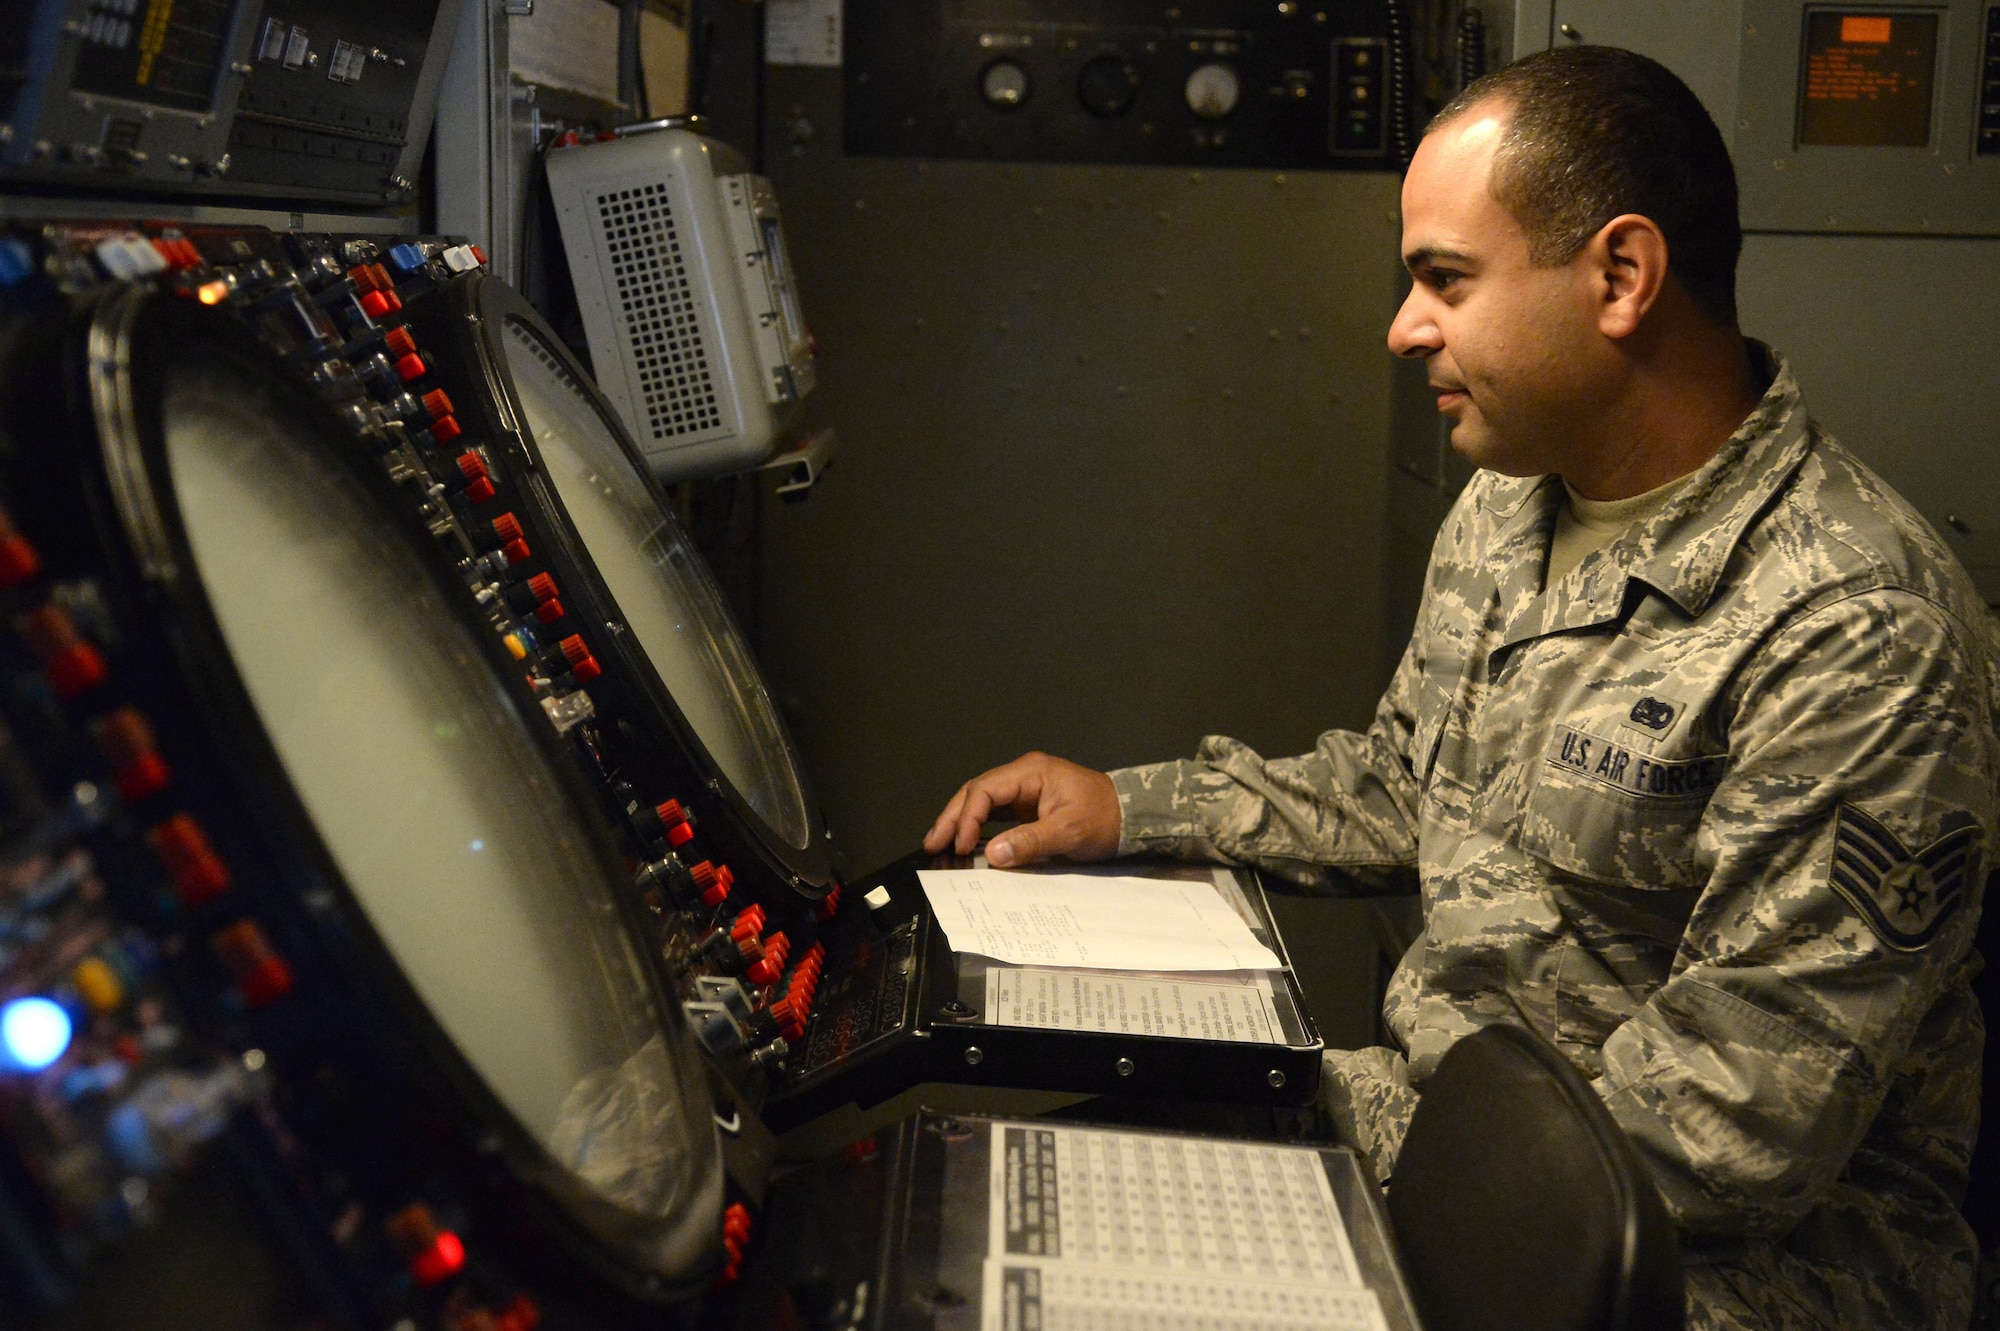 Staff Sgt. Wilfredo, radar maintenance technician, verifies system parameters and enters weather daily values into a TPS-75 radar system to accurately calculate target altitude at an undisclosed location in Southwest Asia March 24, 2015. Radar maintainers make sure the radars are operational so the operators at the Battlespace Command and Control Center-Theater can perform their duties. Wilfredo is currently deployed from the Air National Guard’s 141st Air Control Squadron out of Ramey Air Force Base, Puerto Rico. (U.S. Air Force photo/Tech. Sgt. Brown/RELEASED)